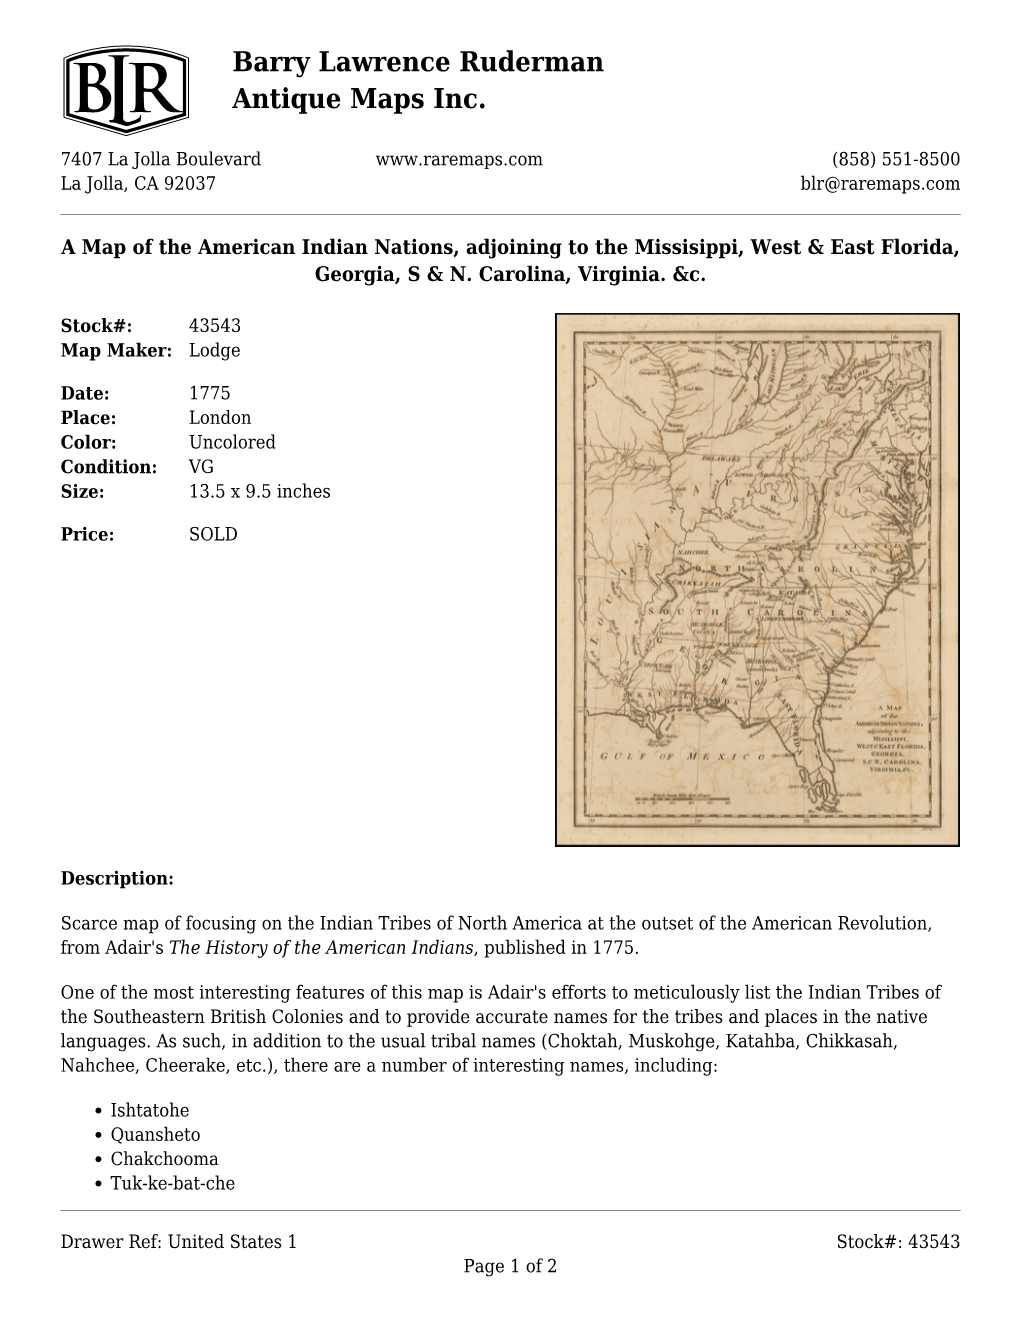 Barry Lawrence Ruderman Antique Maps Inc